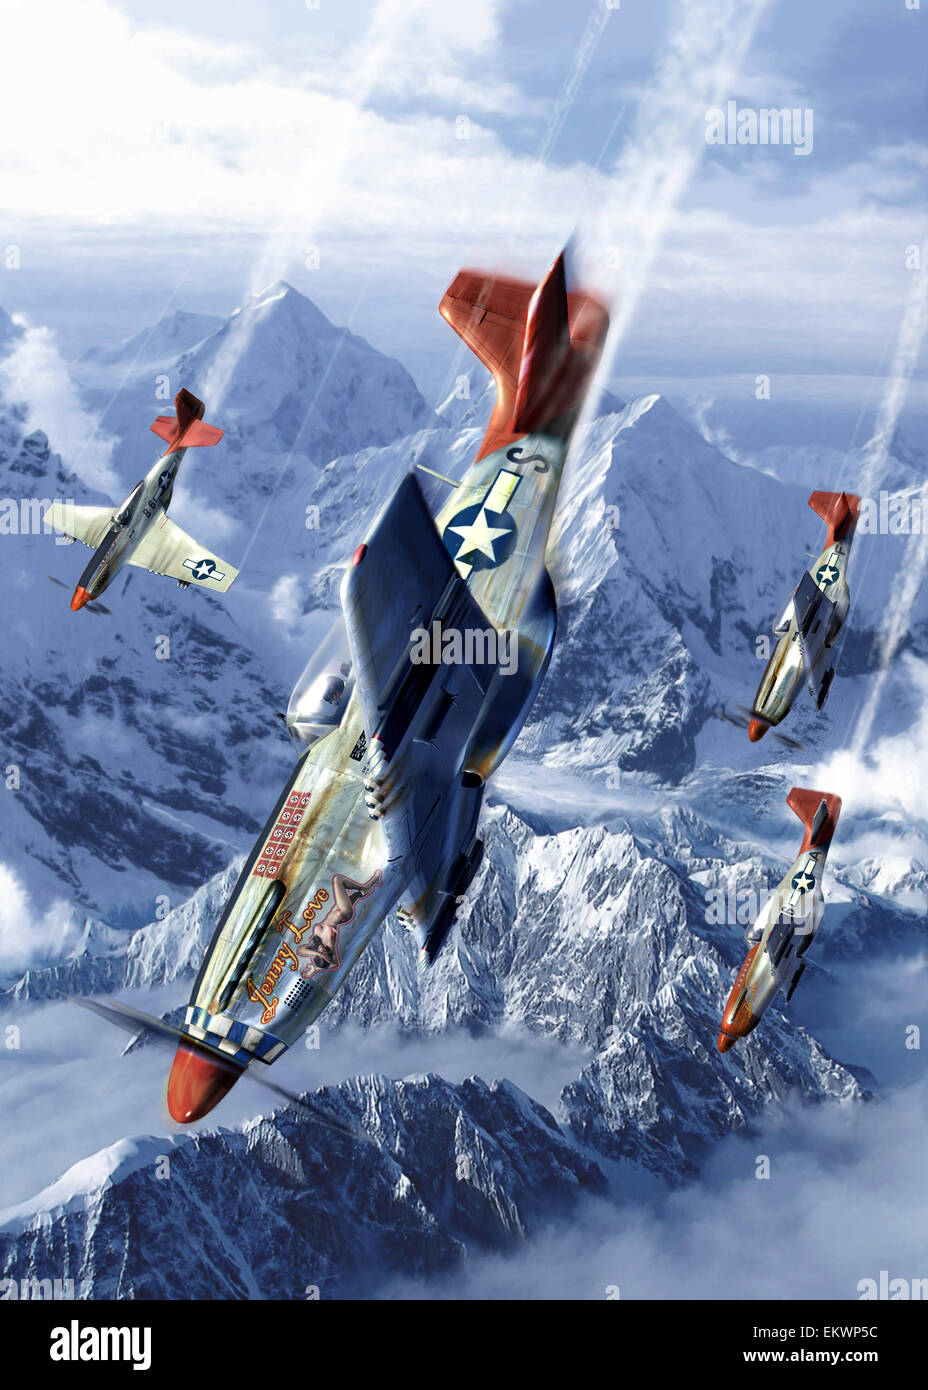 Tuskegee airmen of the 332nd fighter group flying near the Alps in their P-51 Mustangs. Stock Photo